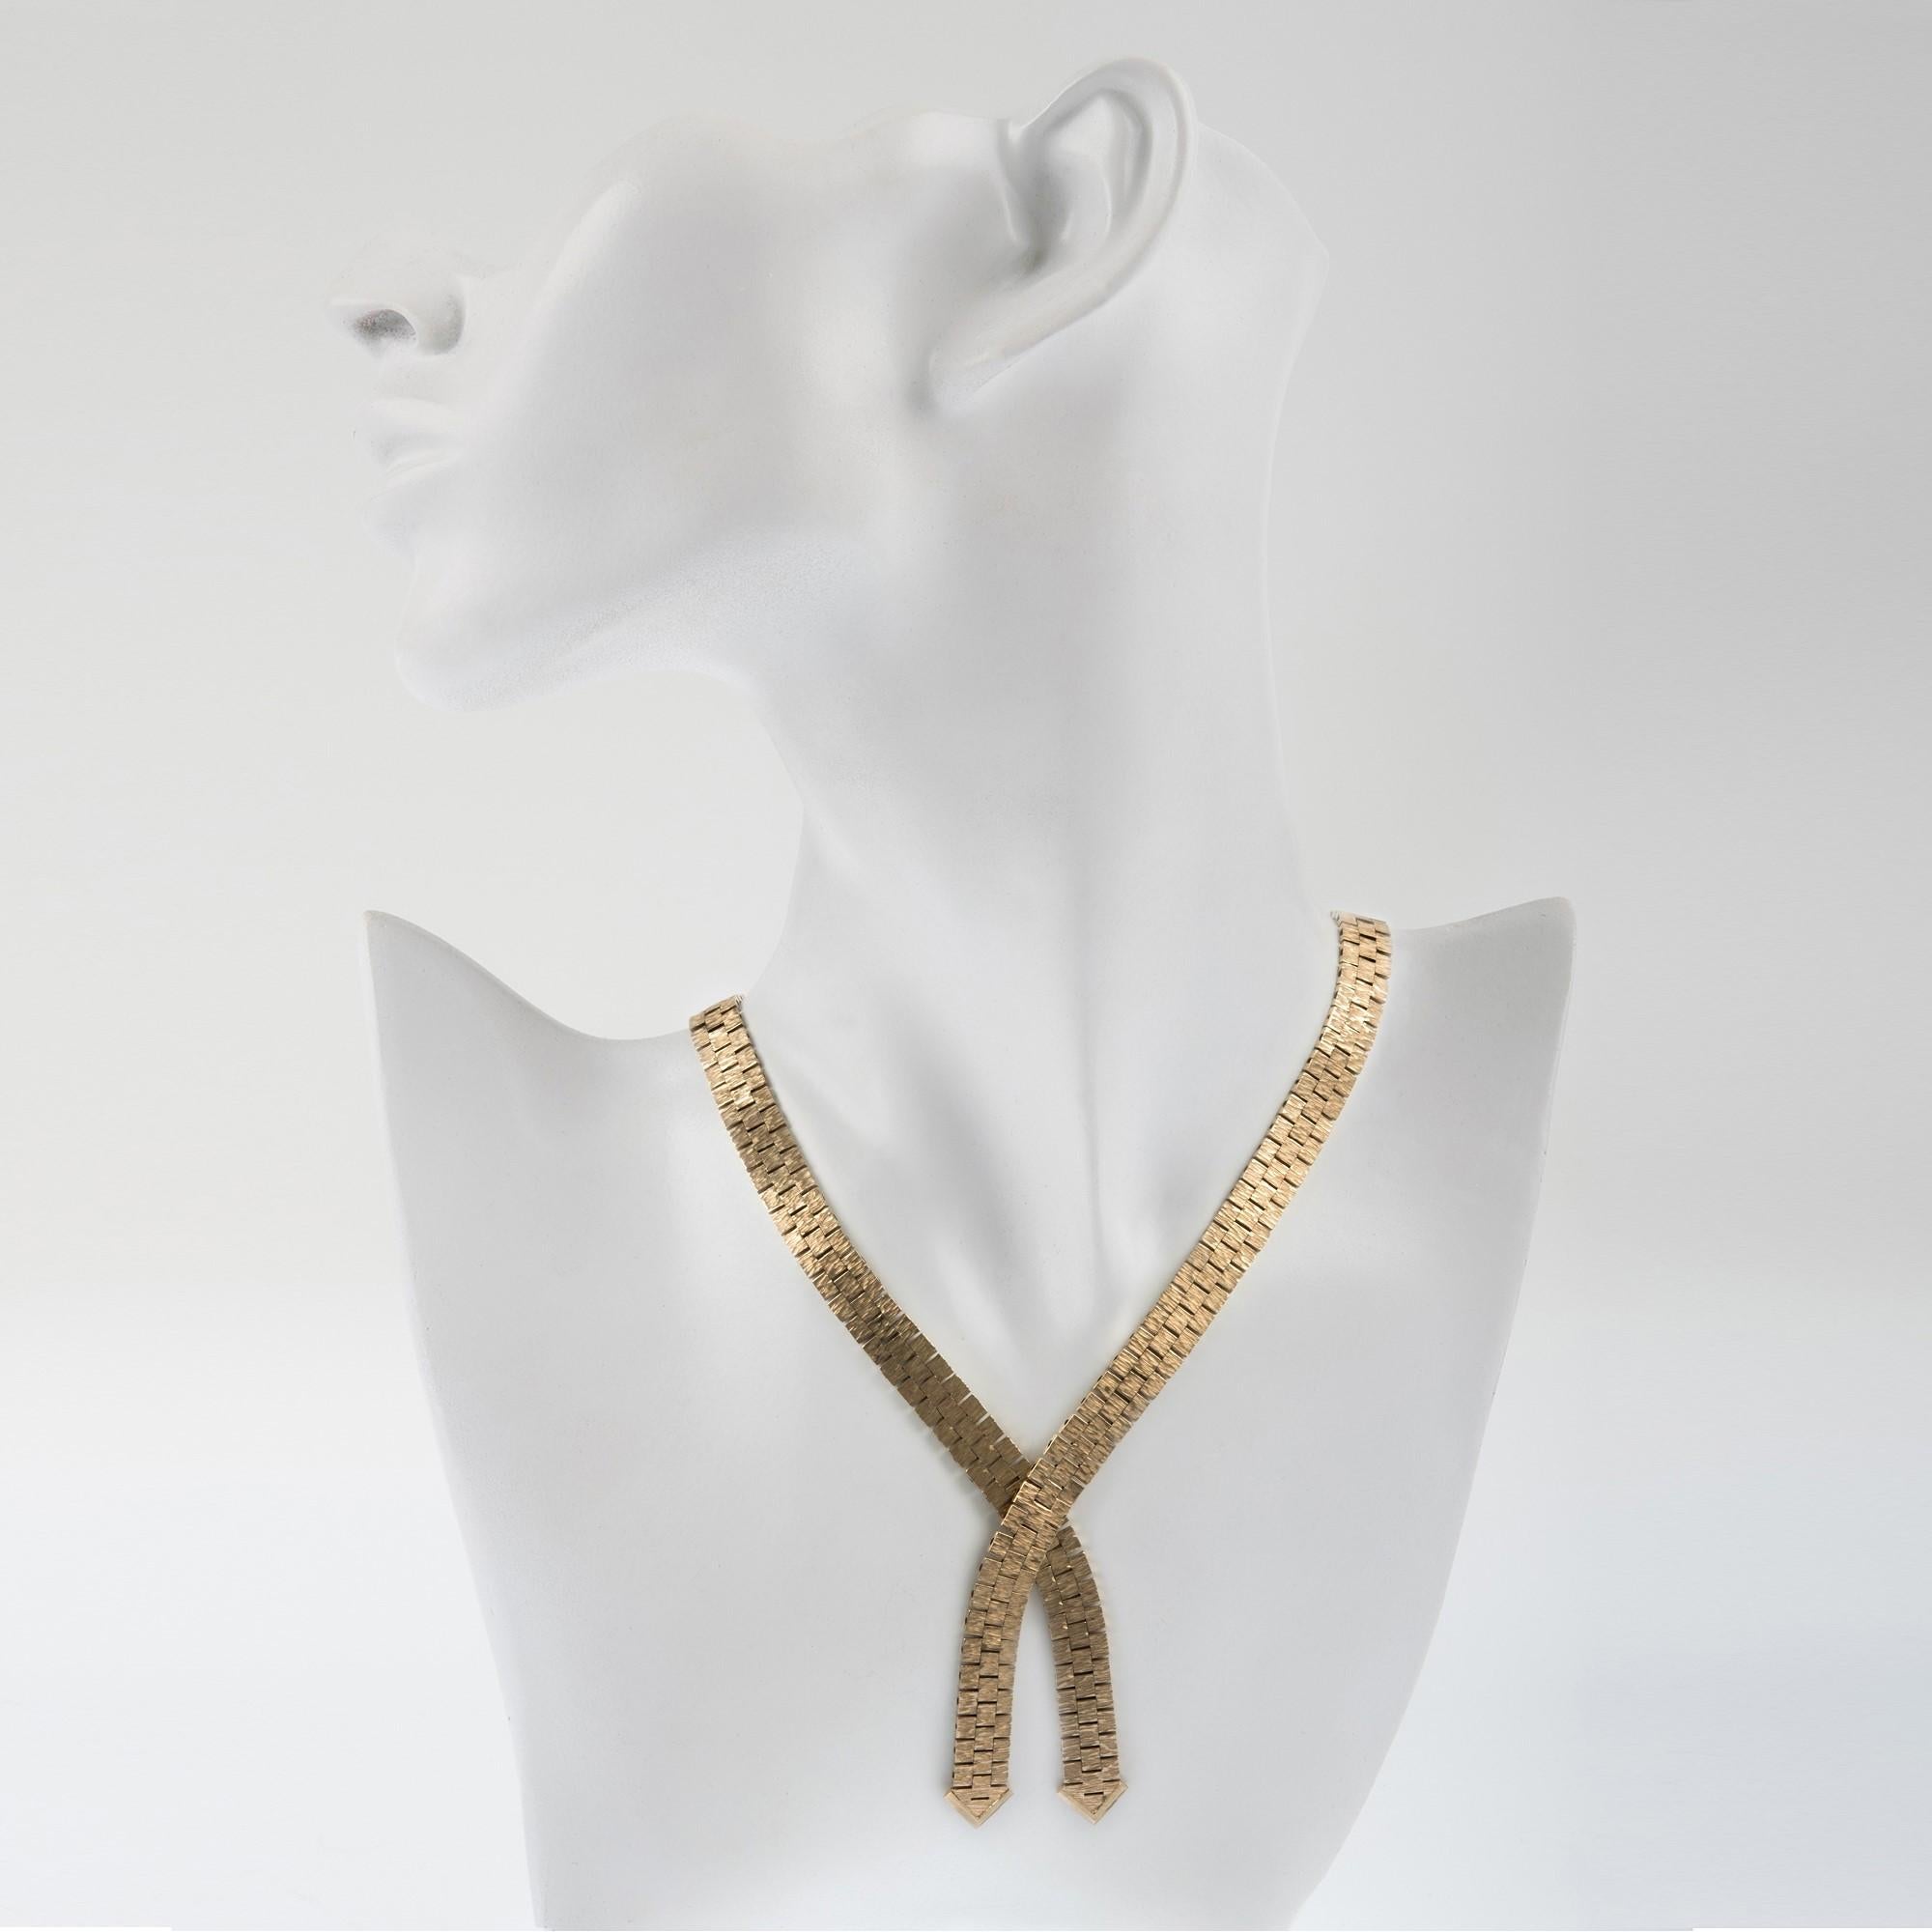 This sleek and stylish 9ct yellow gold necklace is crafted from textured flat book chain and exhibits a brick like pattern. A wonderful vintage style and a unique and beautiful gift for a gold occasion or birthday.